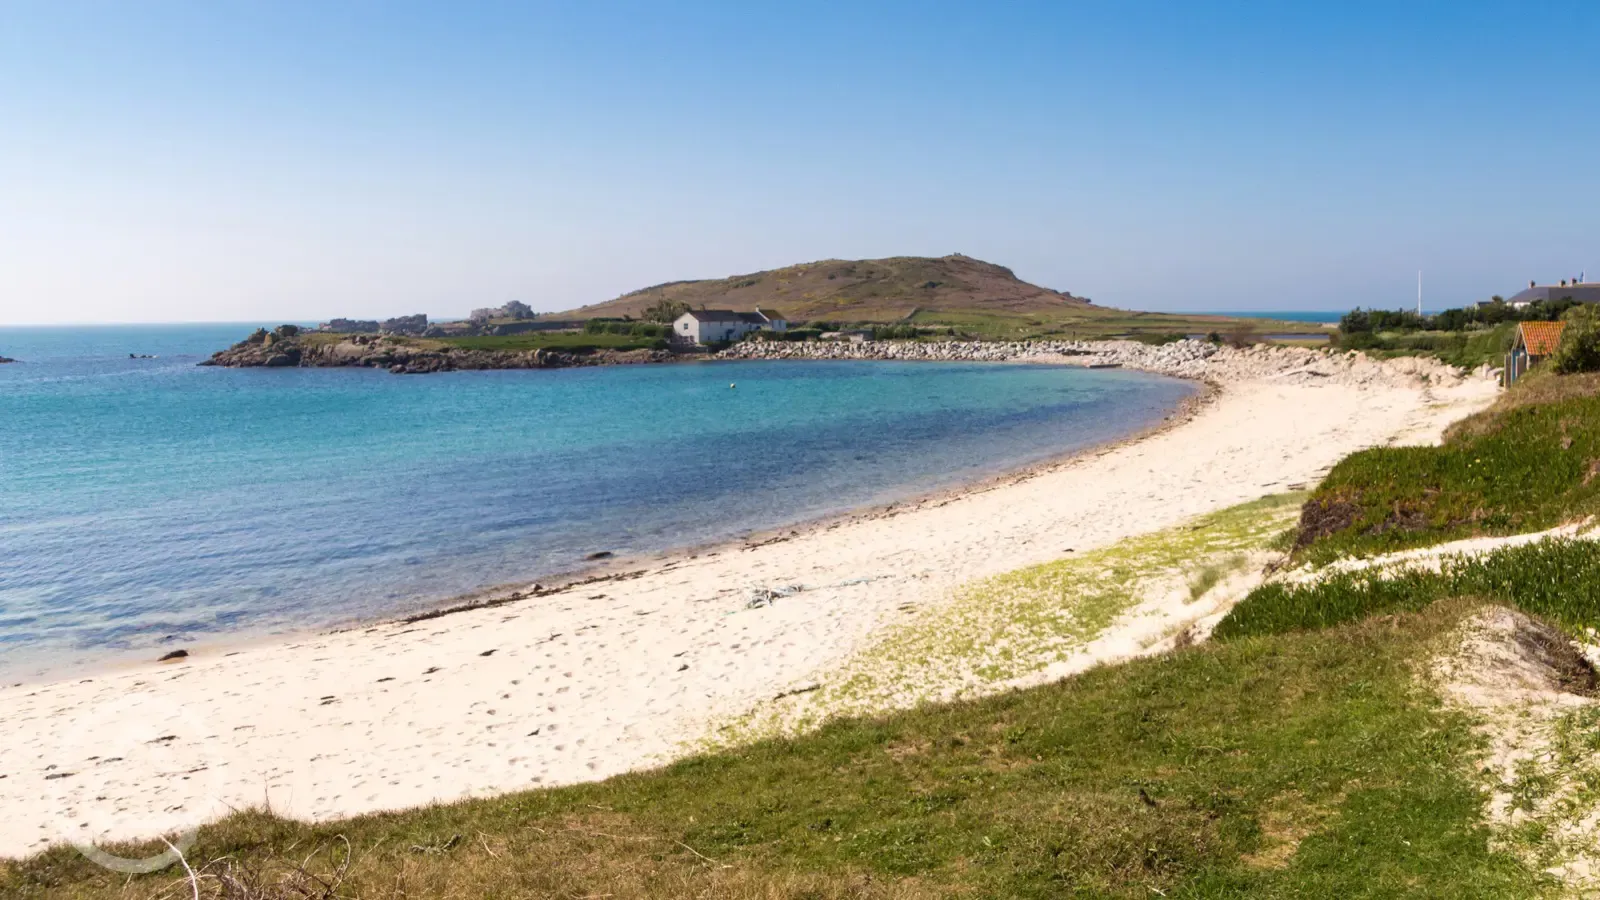 Bryher's beautiful, deserted beaches are only minutes away